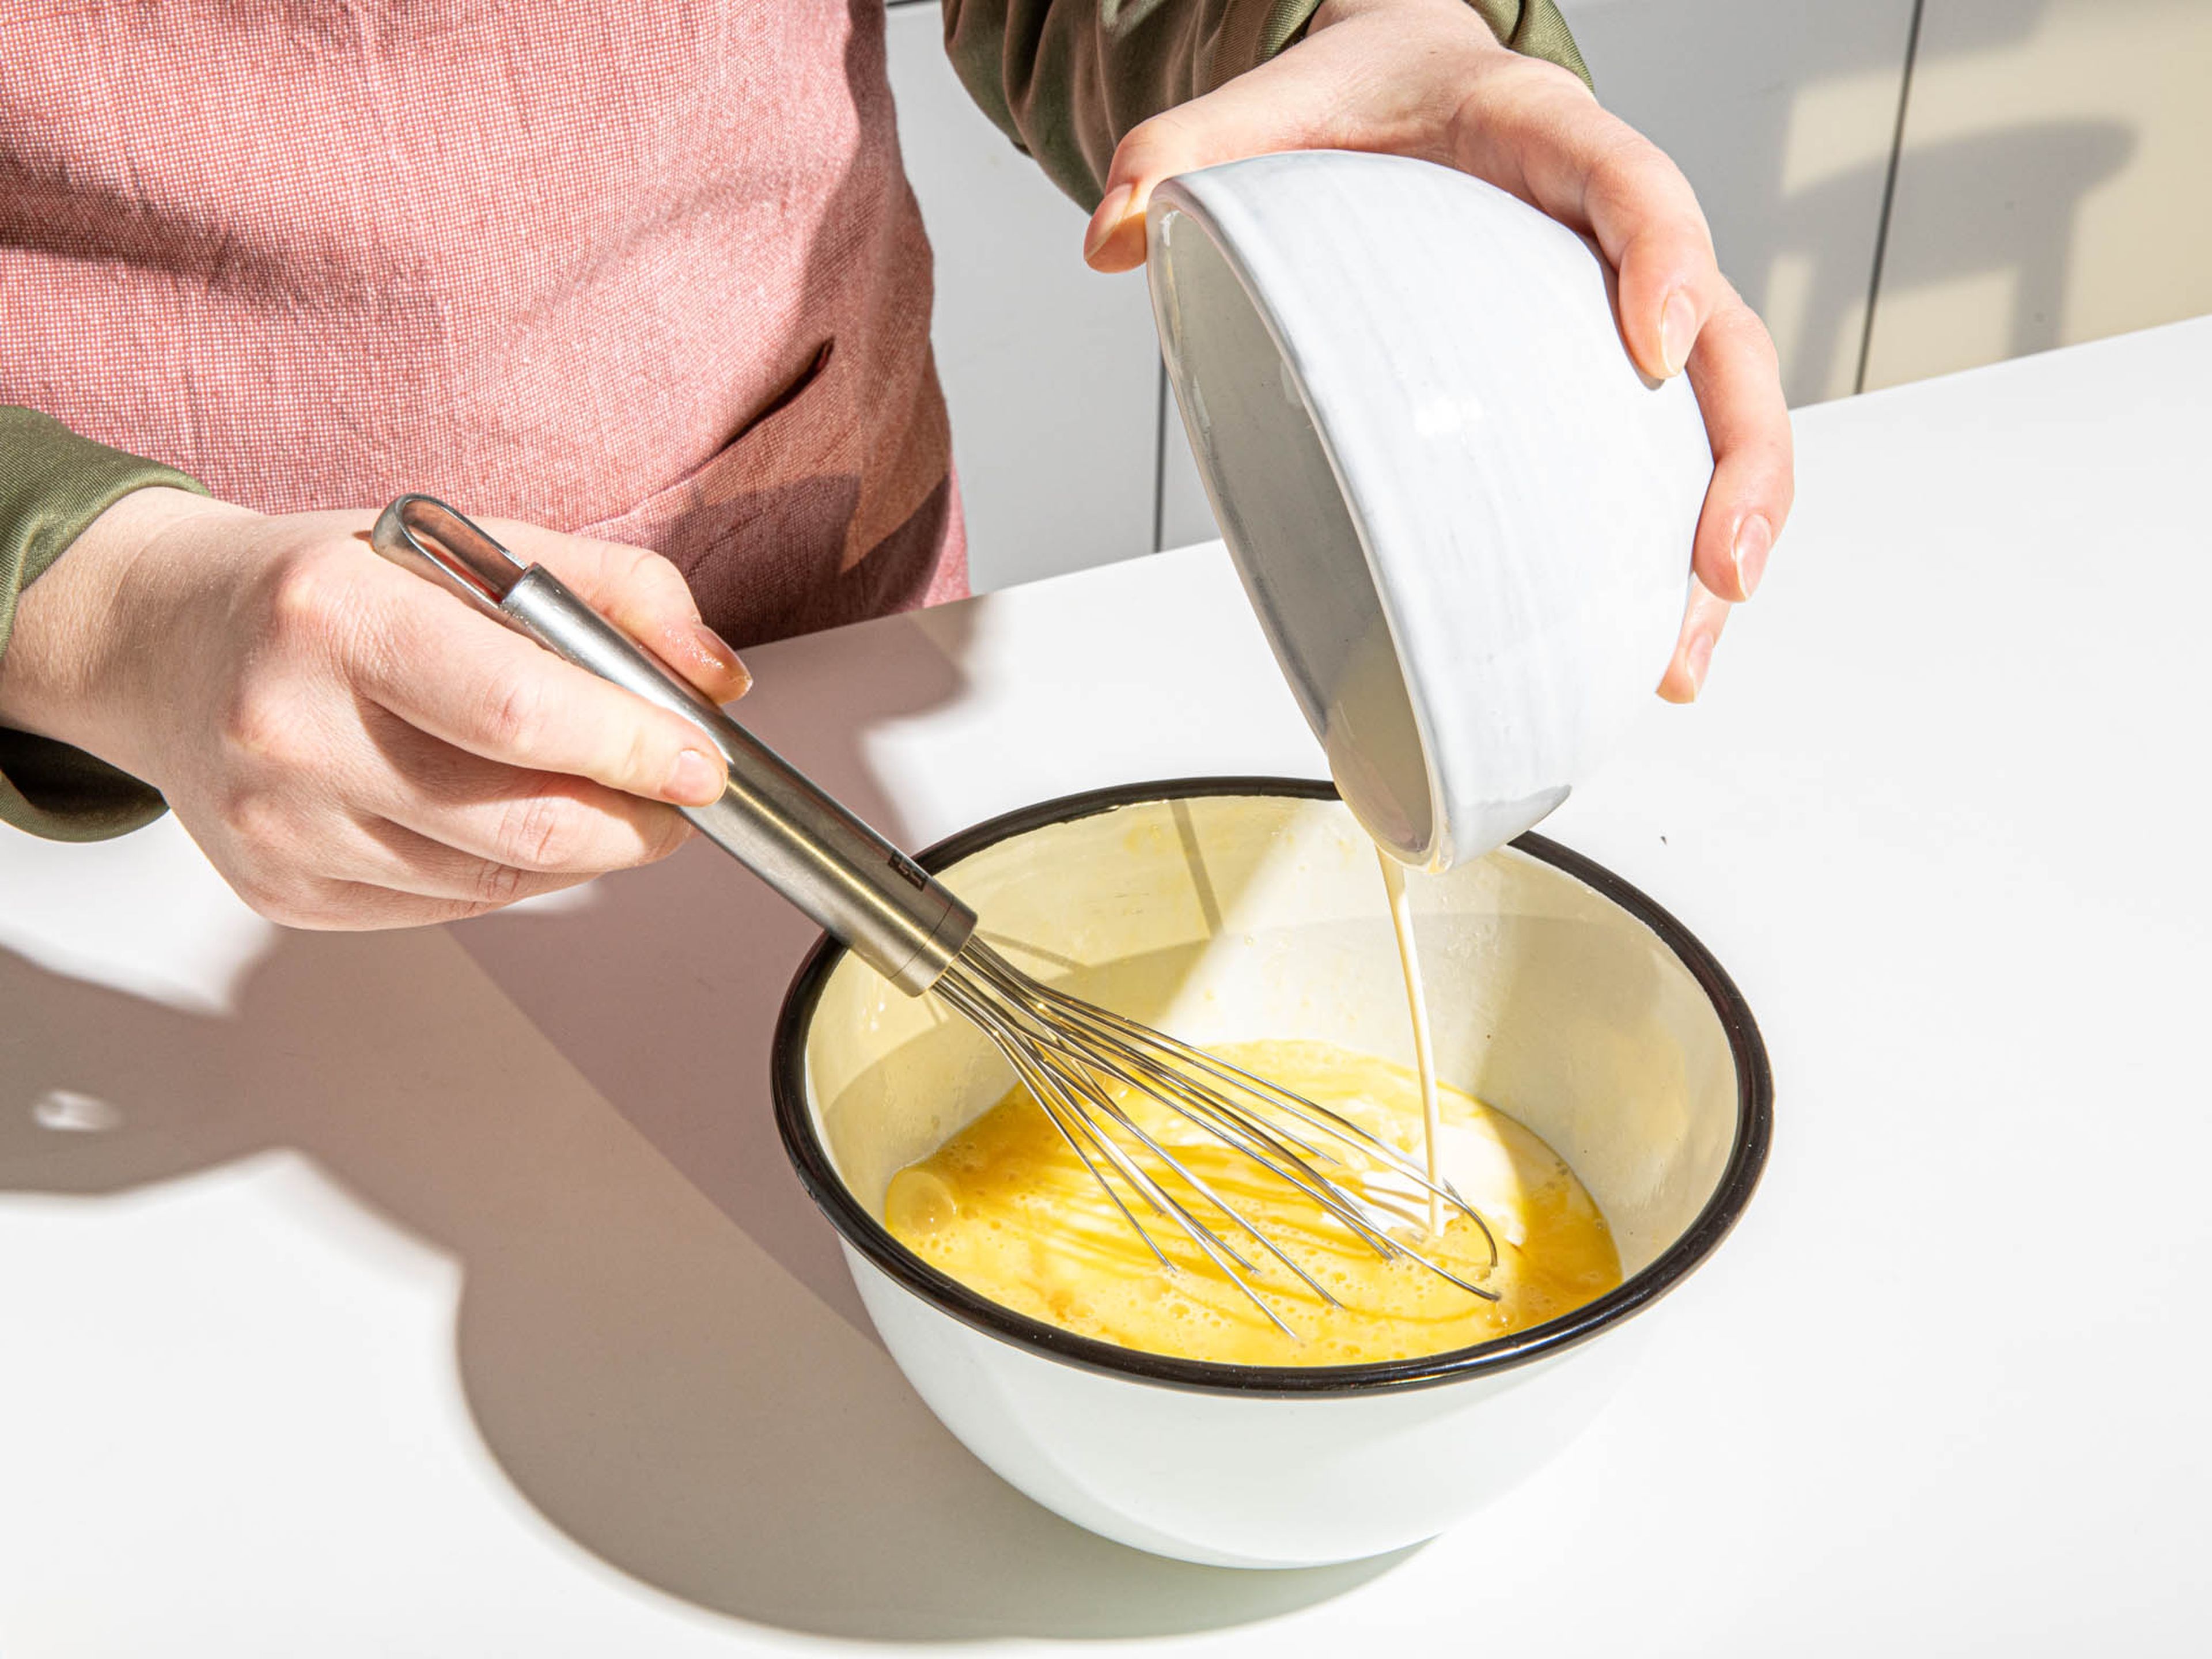 In a small bowl, beat eggs until frothy. Then add cream, salt, and pepper, and whisk to combine.